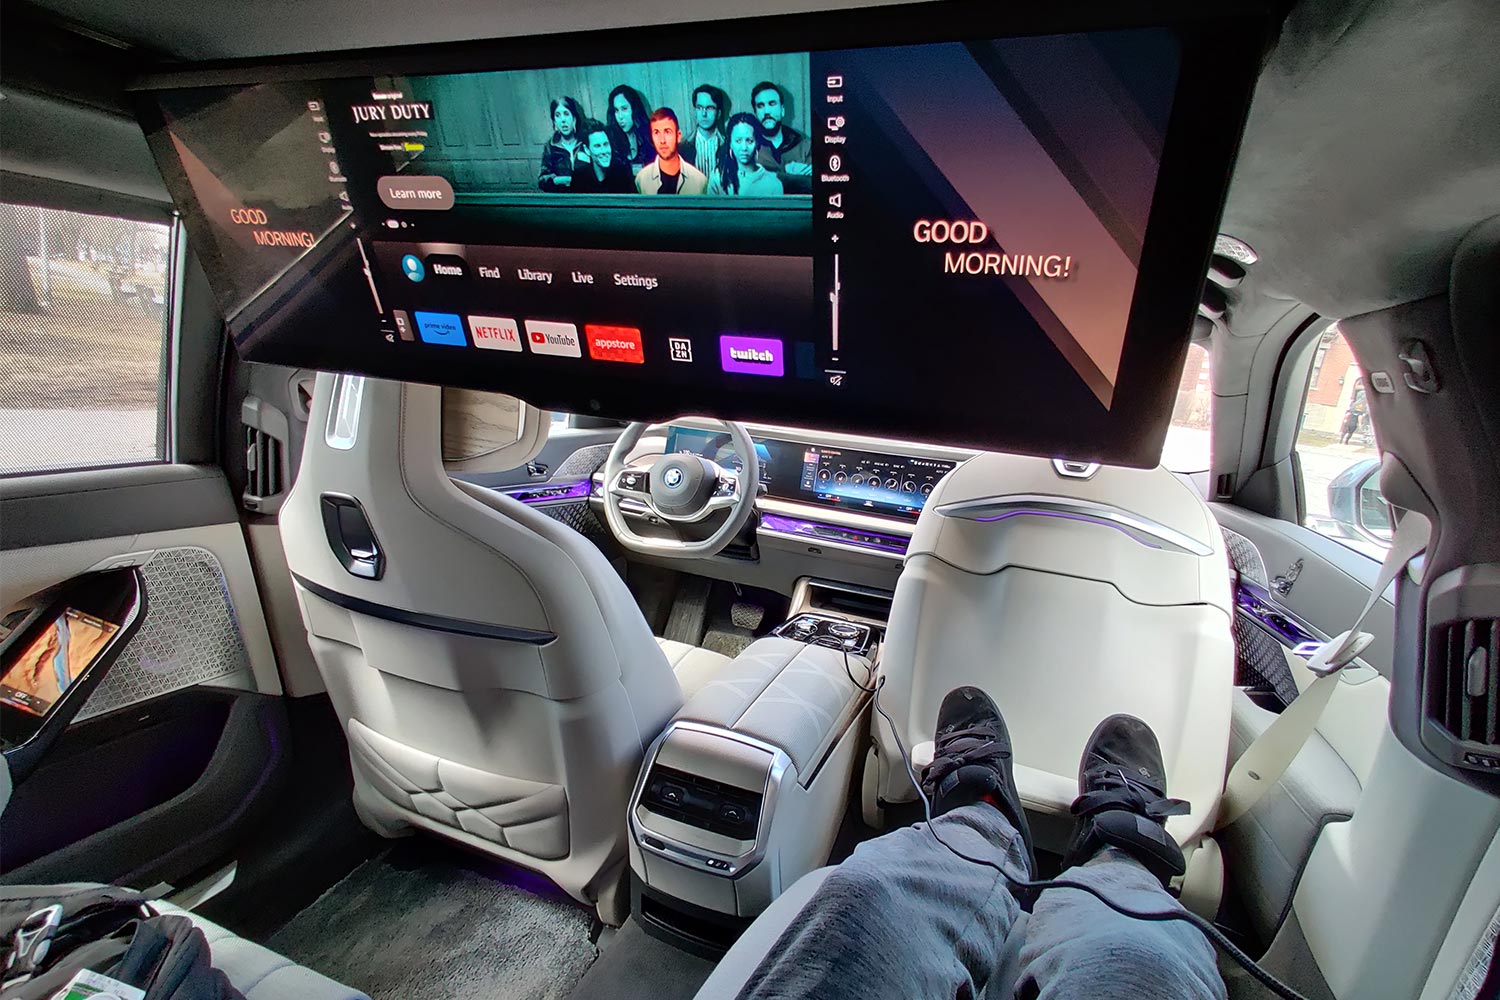 Sitting in the backseat of a BMW i7 electric car watching TV on the 31.3-inch panoramic screen